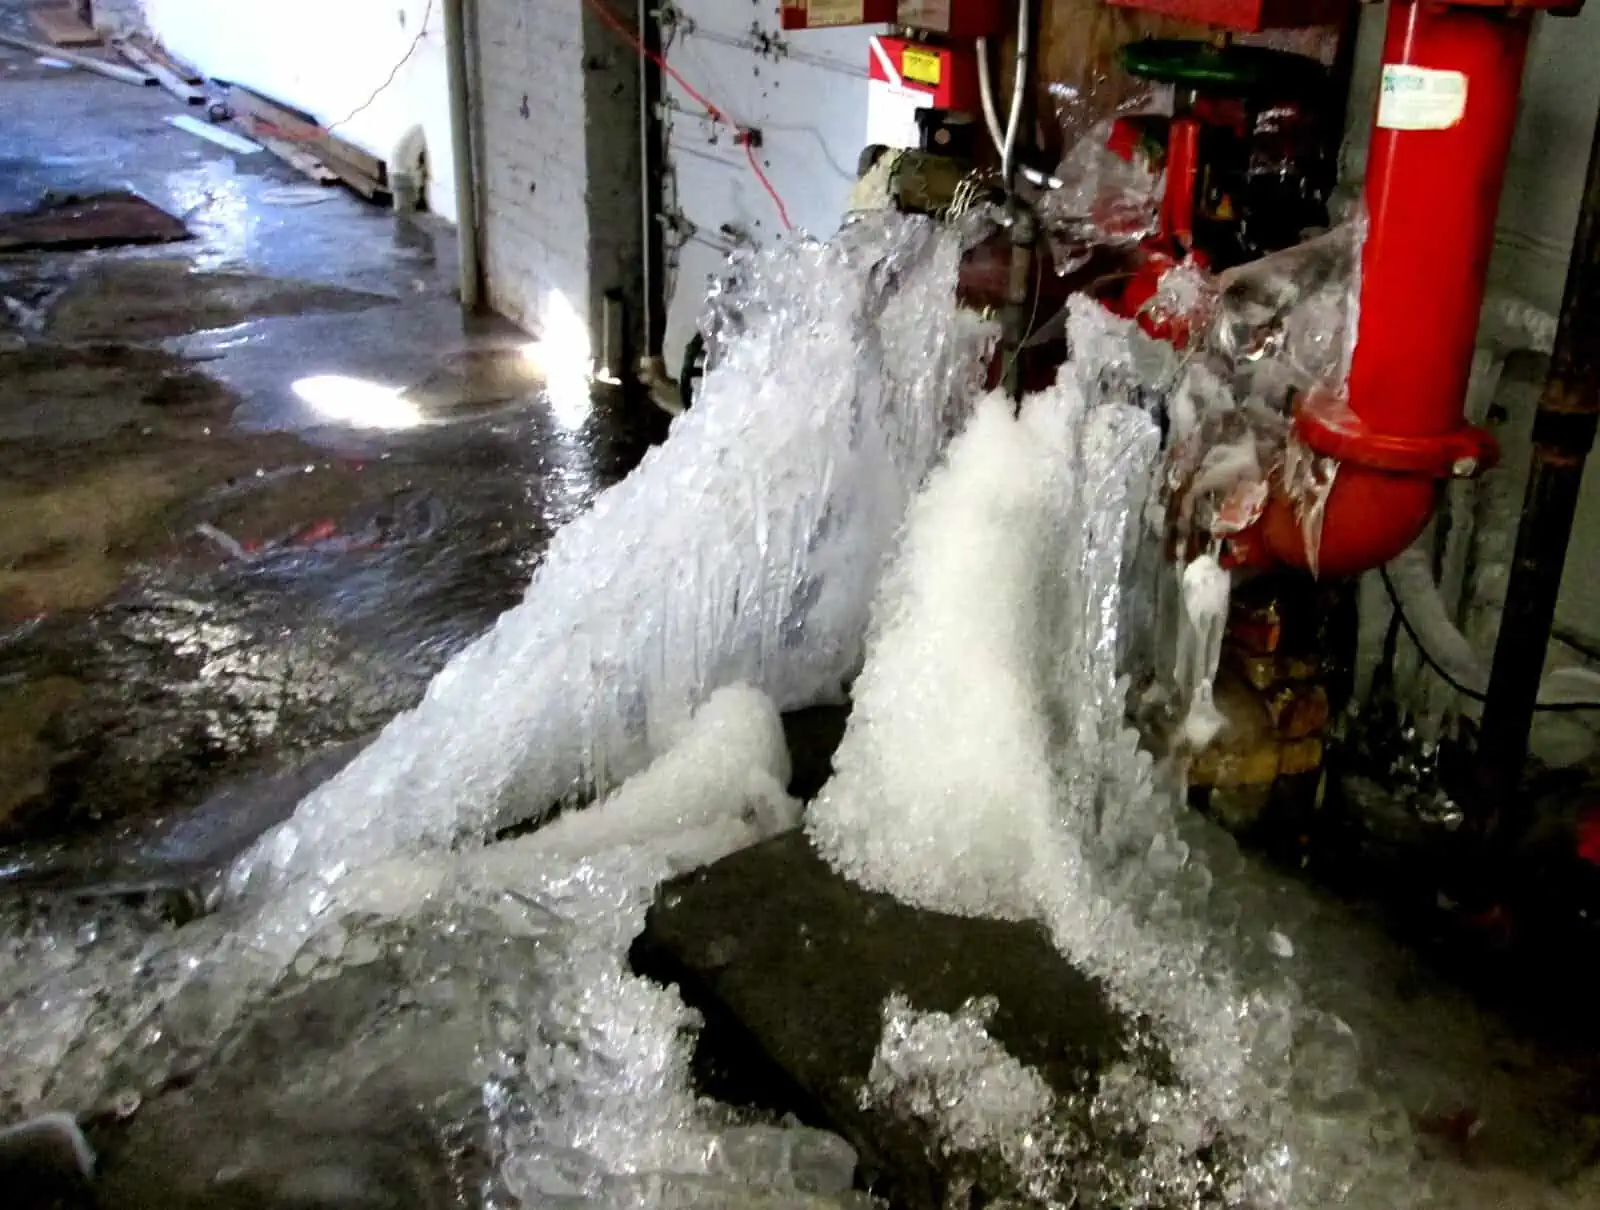 A plumbing emergency caused by a frozen water main splitting apart.